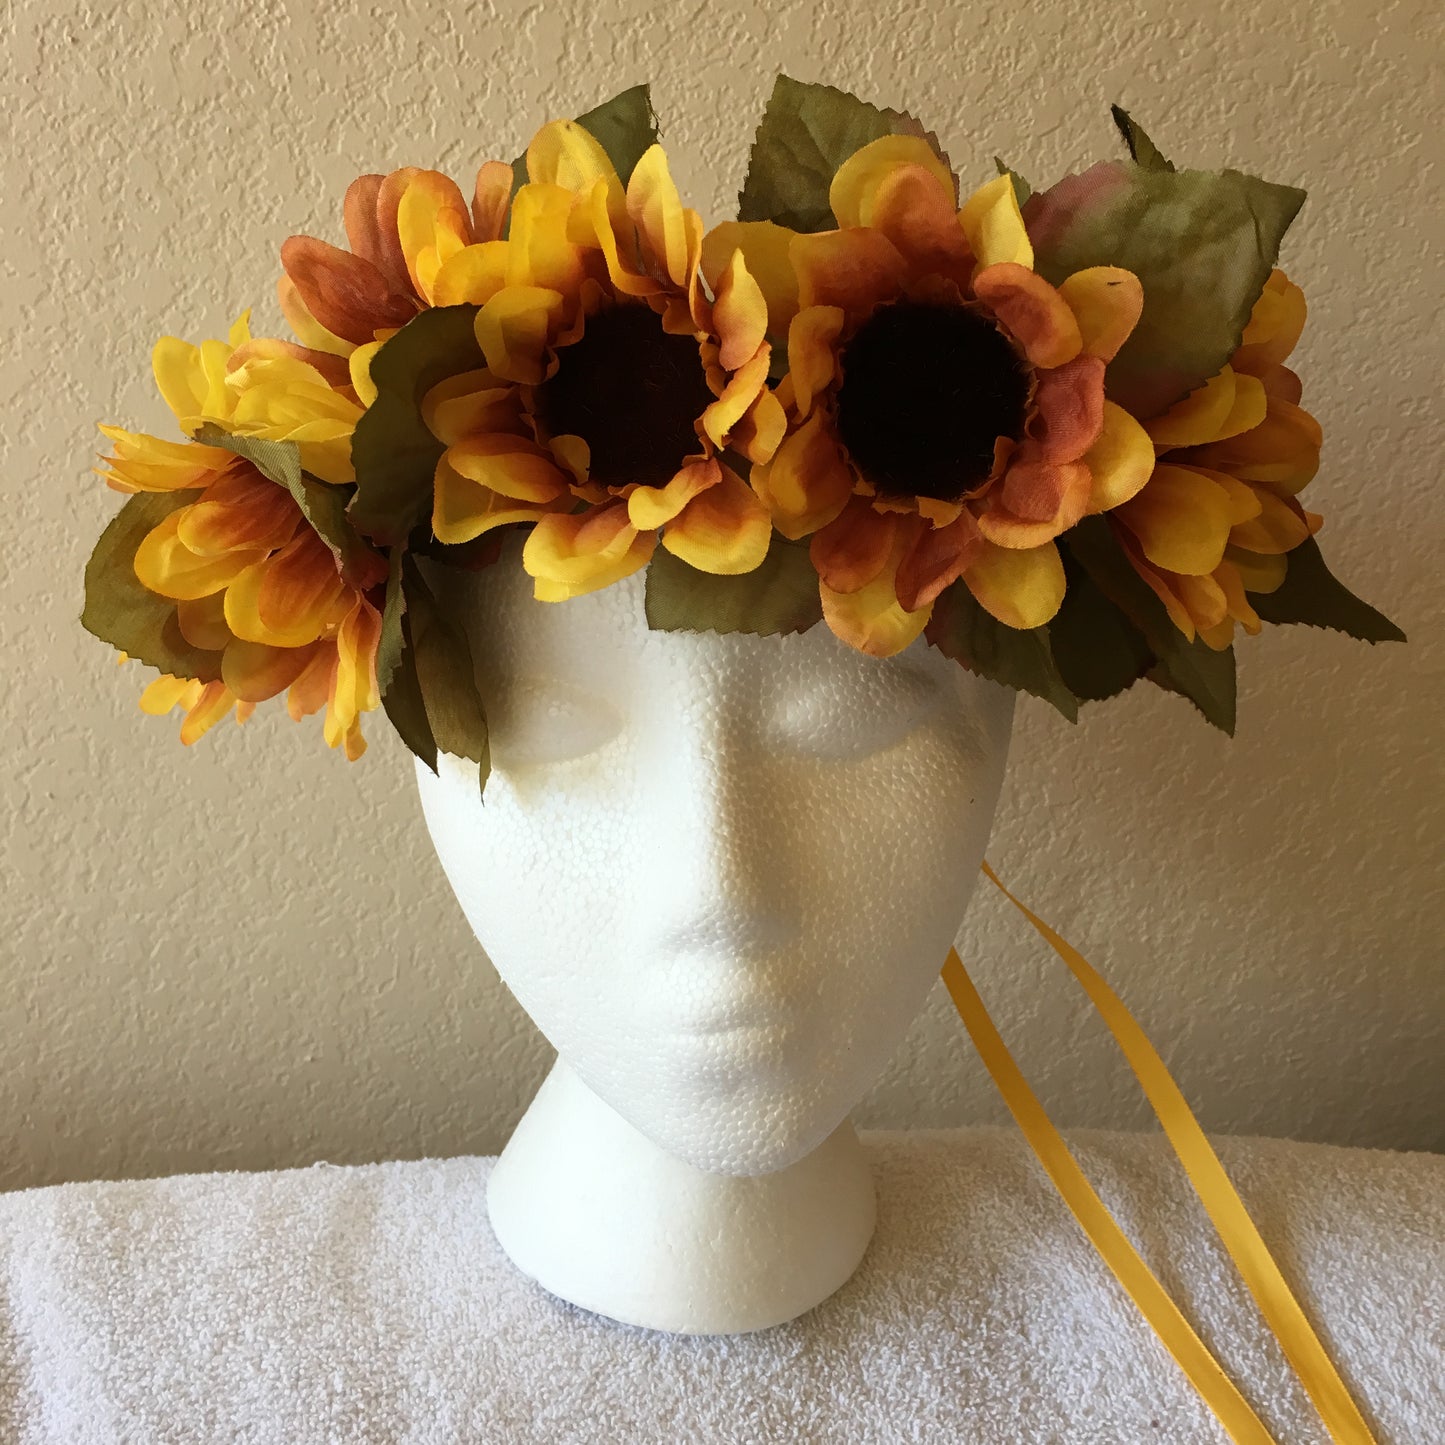 Large Wreath - Sunflowers w/ lots of leaves